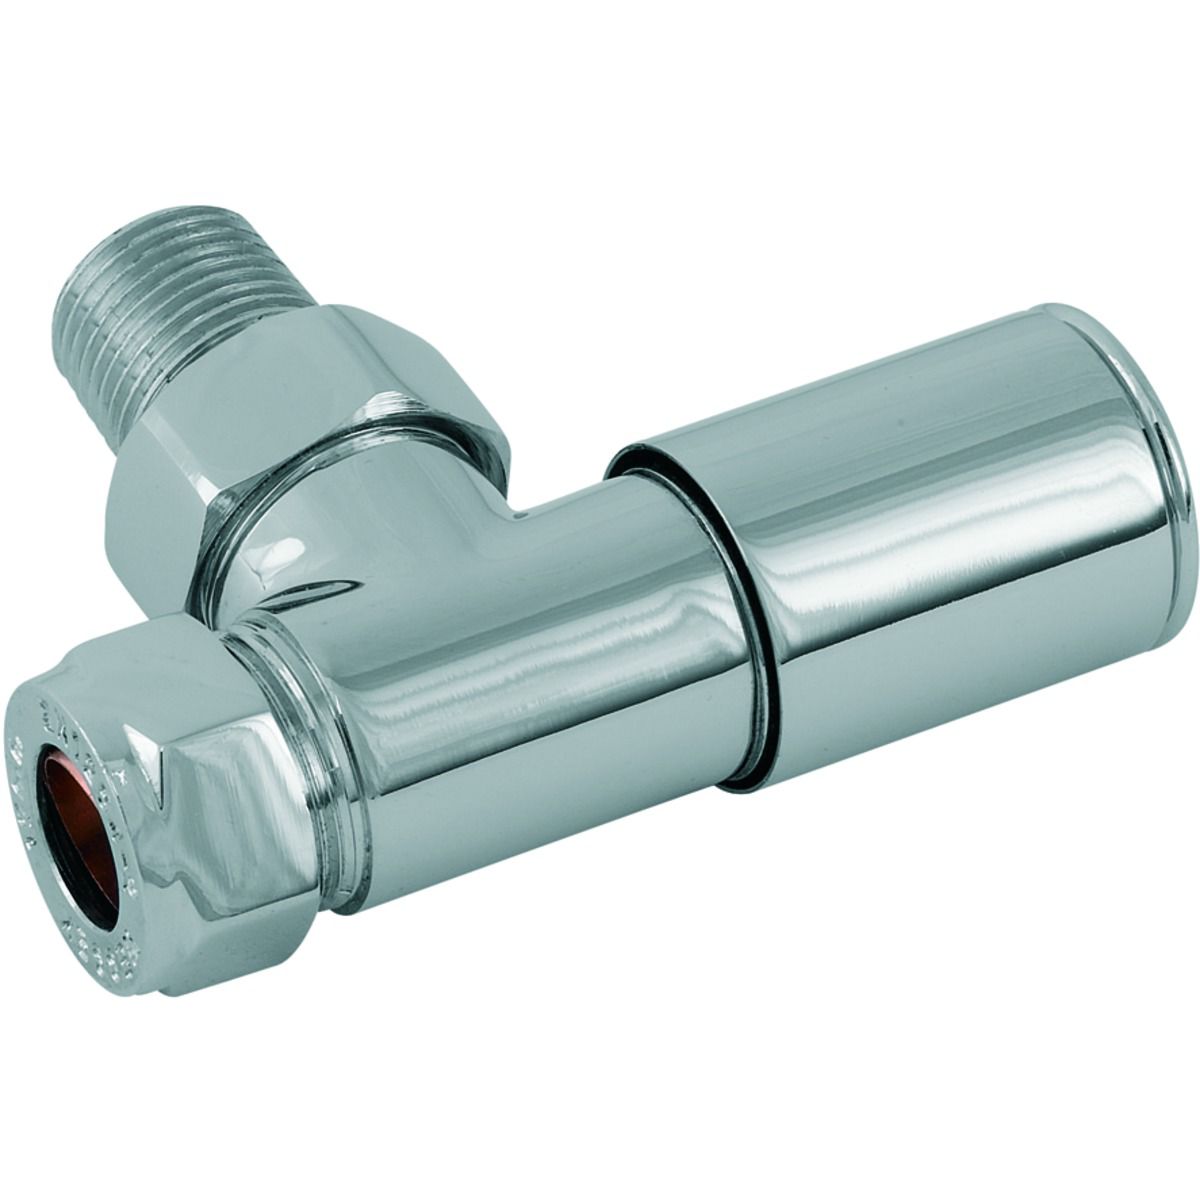 Image of Primaflow 15mm Smooth Head Angled Radiator Valve - Chrome - Pack of 2